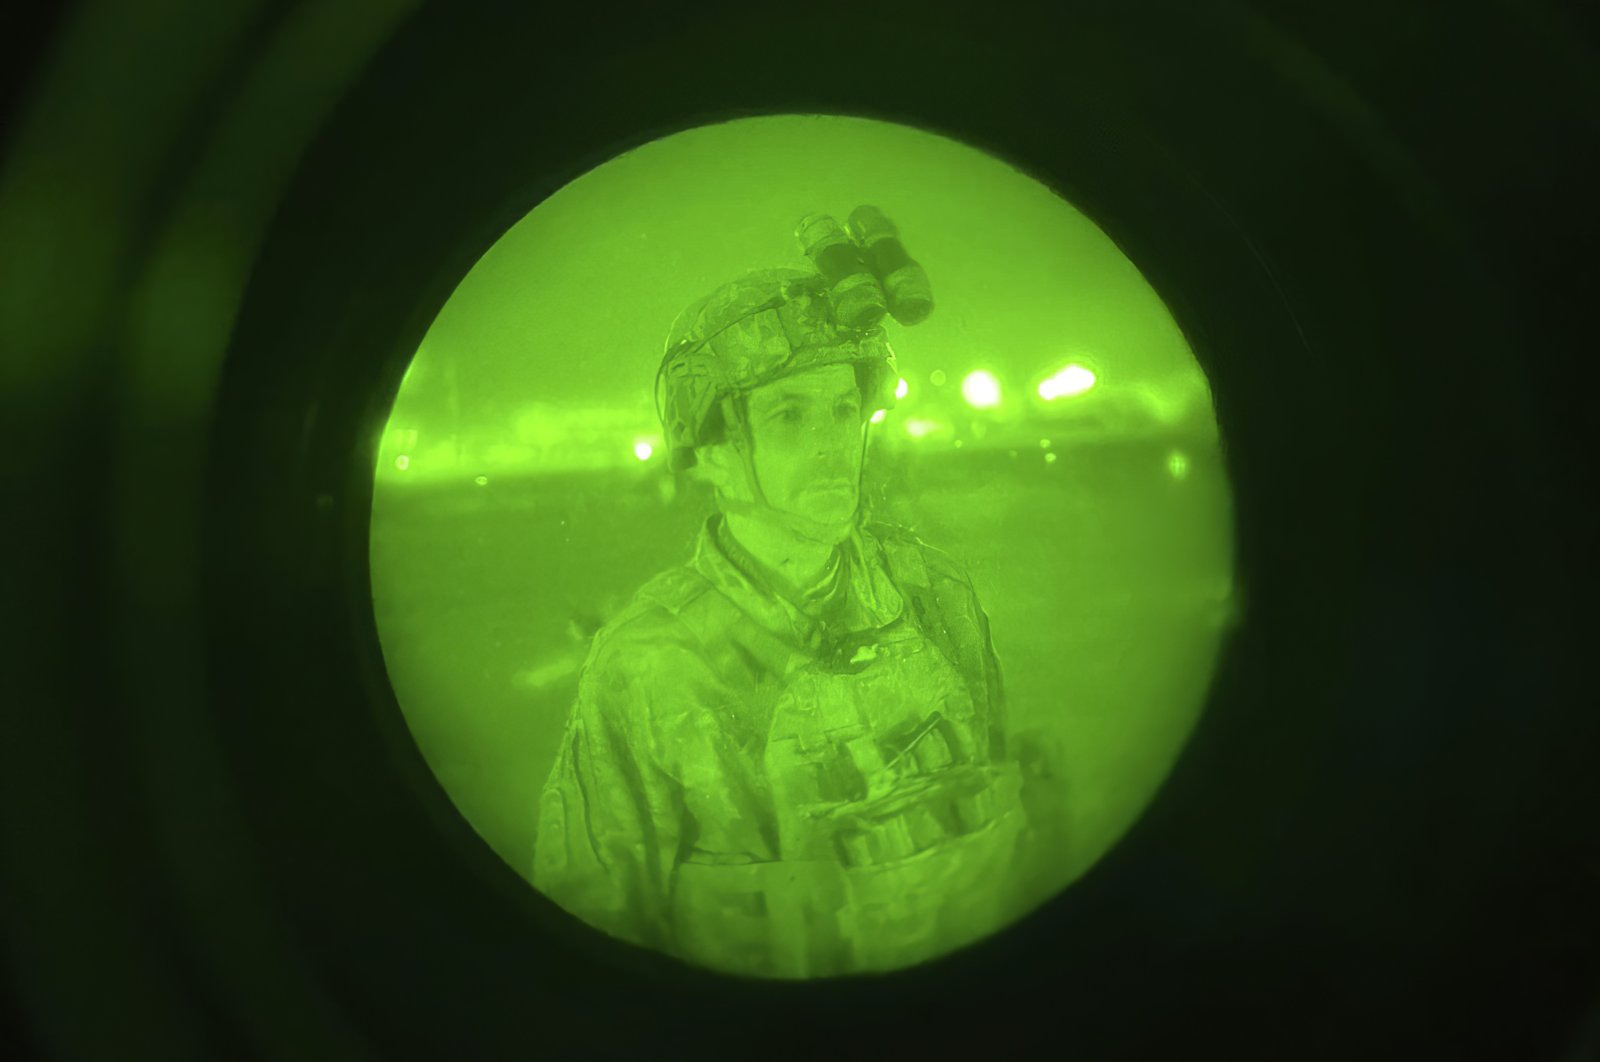 In this image made through a night vision scope and provided by the U.S. Army, Maj. Gen. Chris Donahue, commander of the U.S. Army 82nd Airborne Division, XVIII Airborne Corps, prepares to board a C-17 cargo plane at Kabul Hamid Karzai International Airport, Afghanistan, Aug. 30, 2021, as the final American service member to depart Afghanistan. (Master Sgt. Alexander Burnett/U.S. Army via AP)